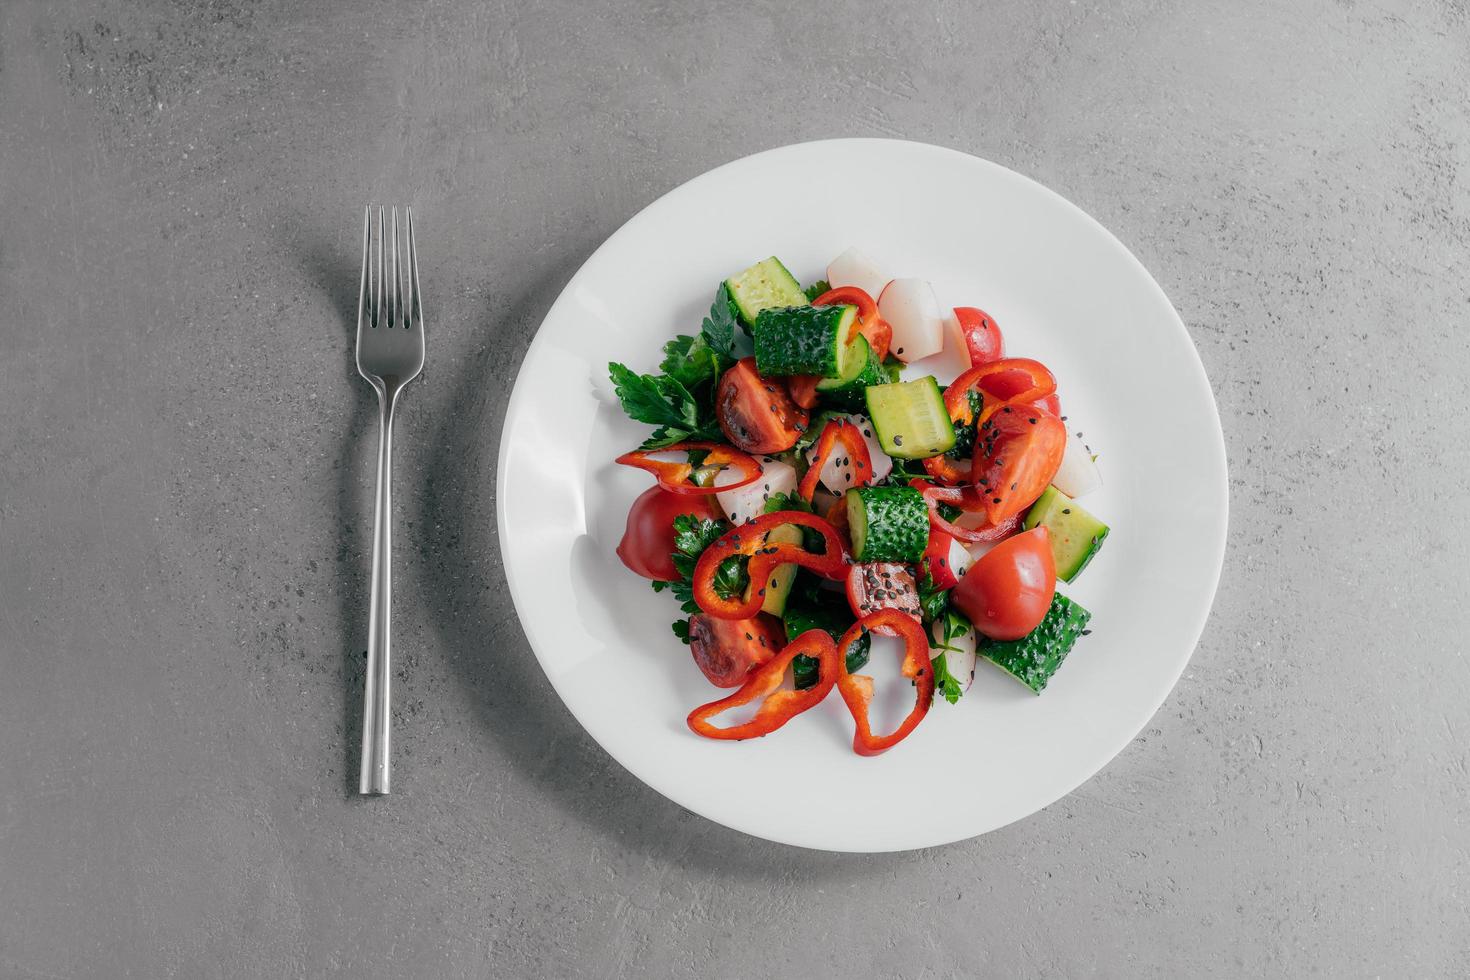 Top view of fresh vegetable salad prepared of red pepper, radish, tomatoes, cucumbers and parsley in white bowl, fork near. Vegetarian dish concept. Healthy nutritious spring salad photo